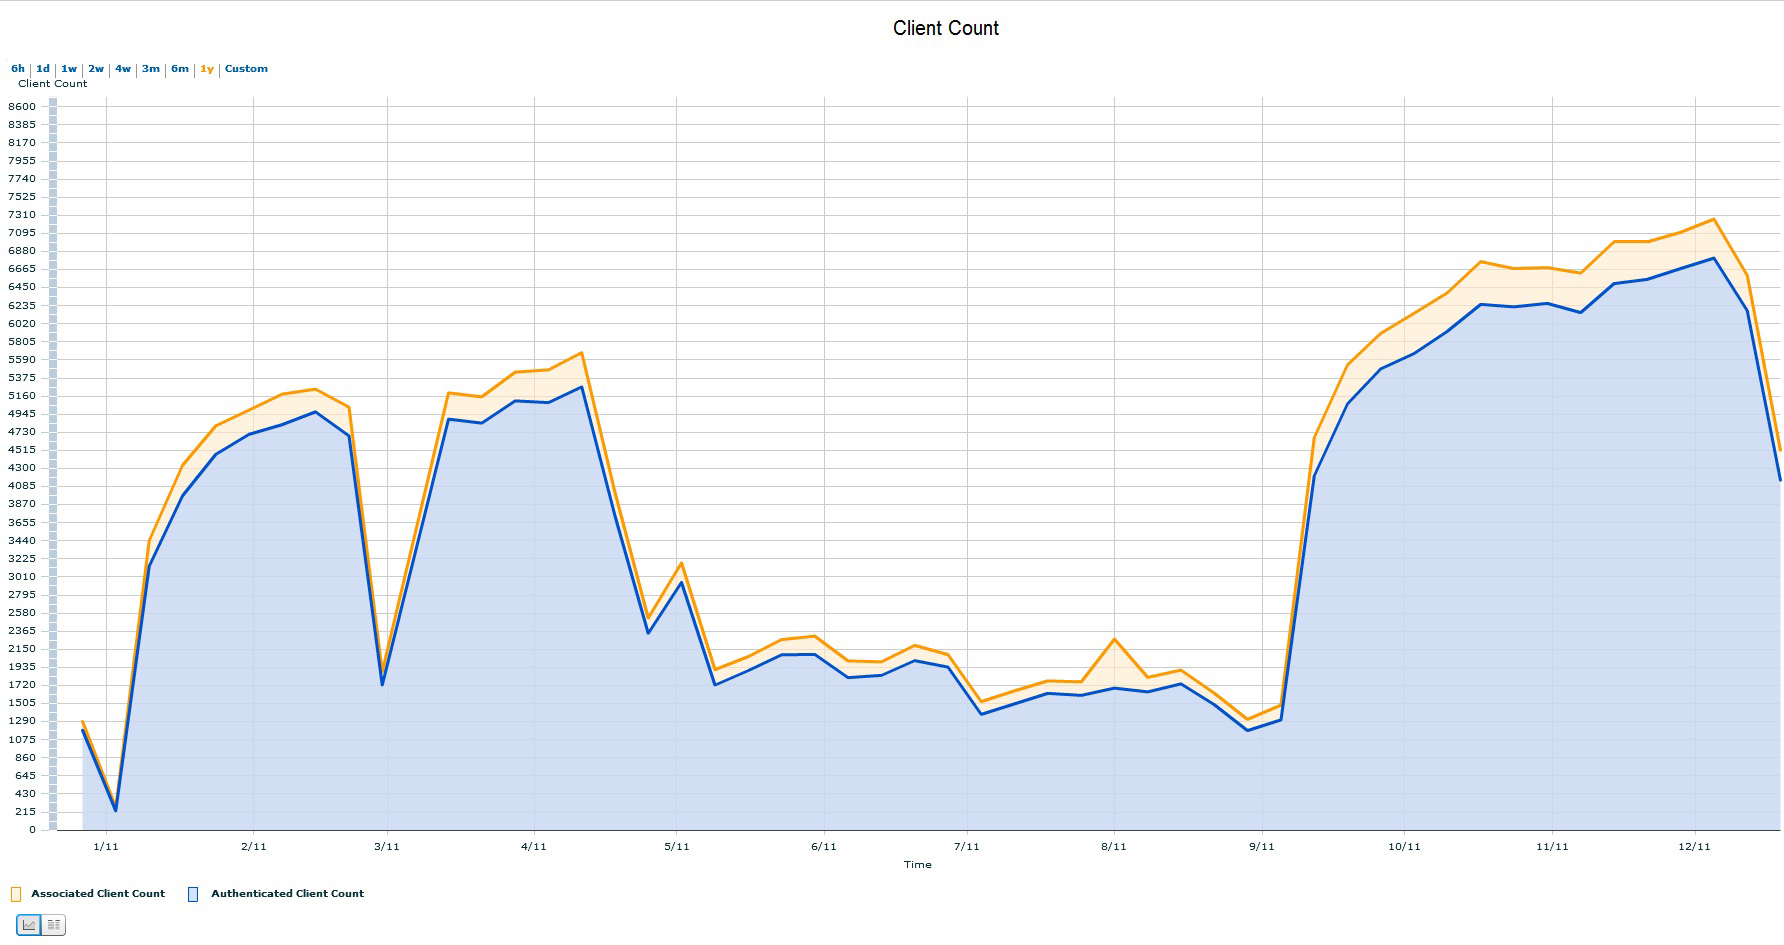  Simultaneous clients during January 2011 and January 2012.